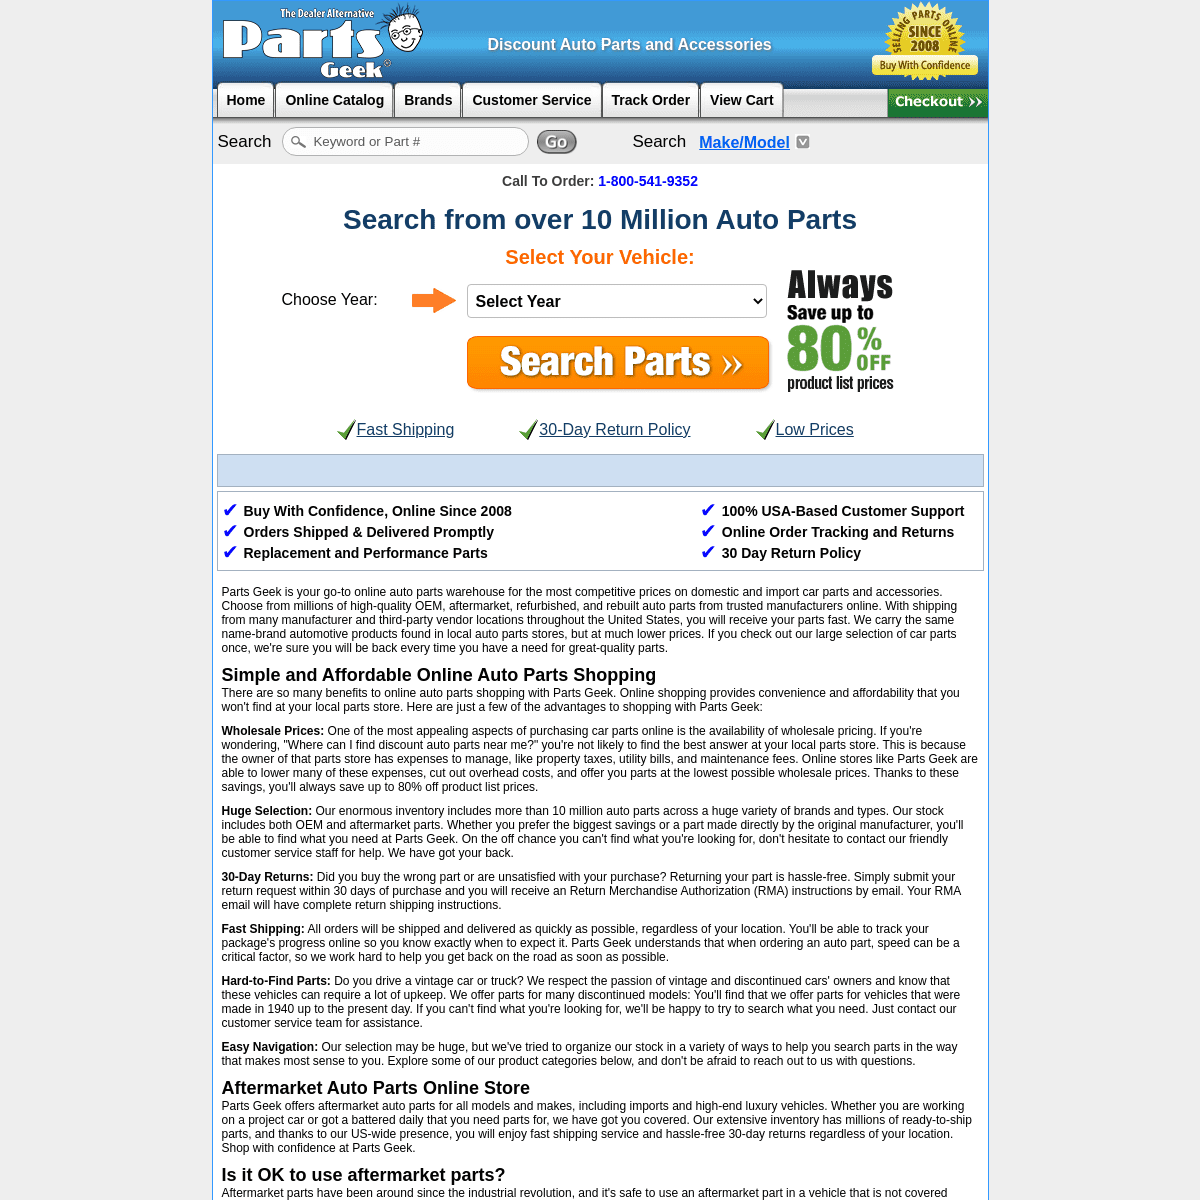 A complete backup of partsgeek.com